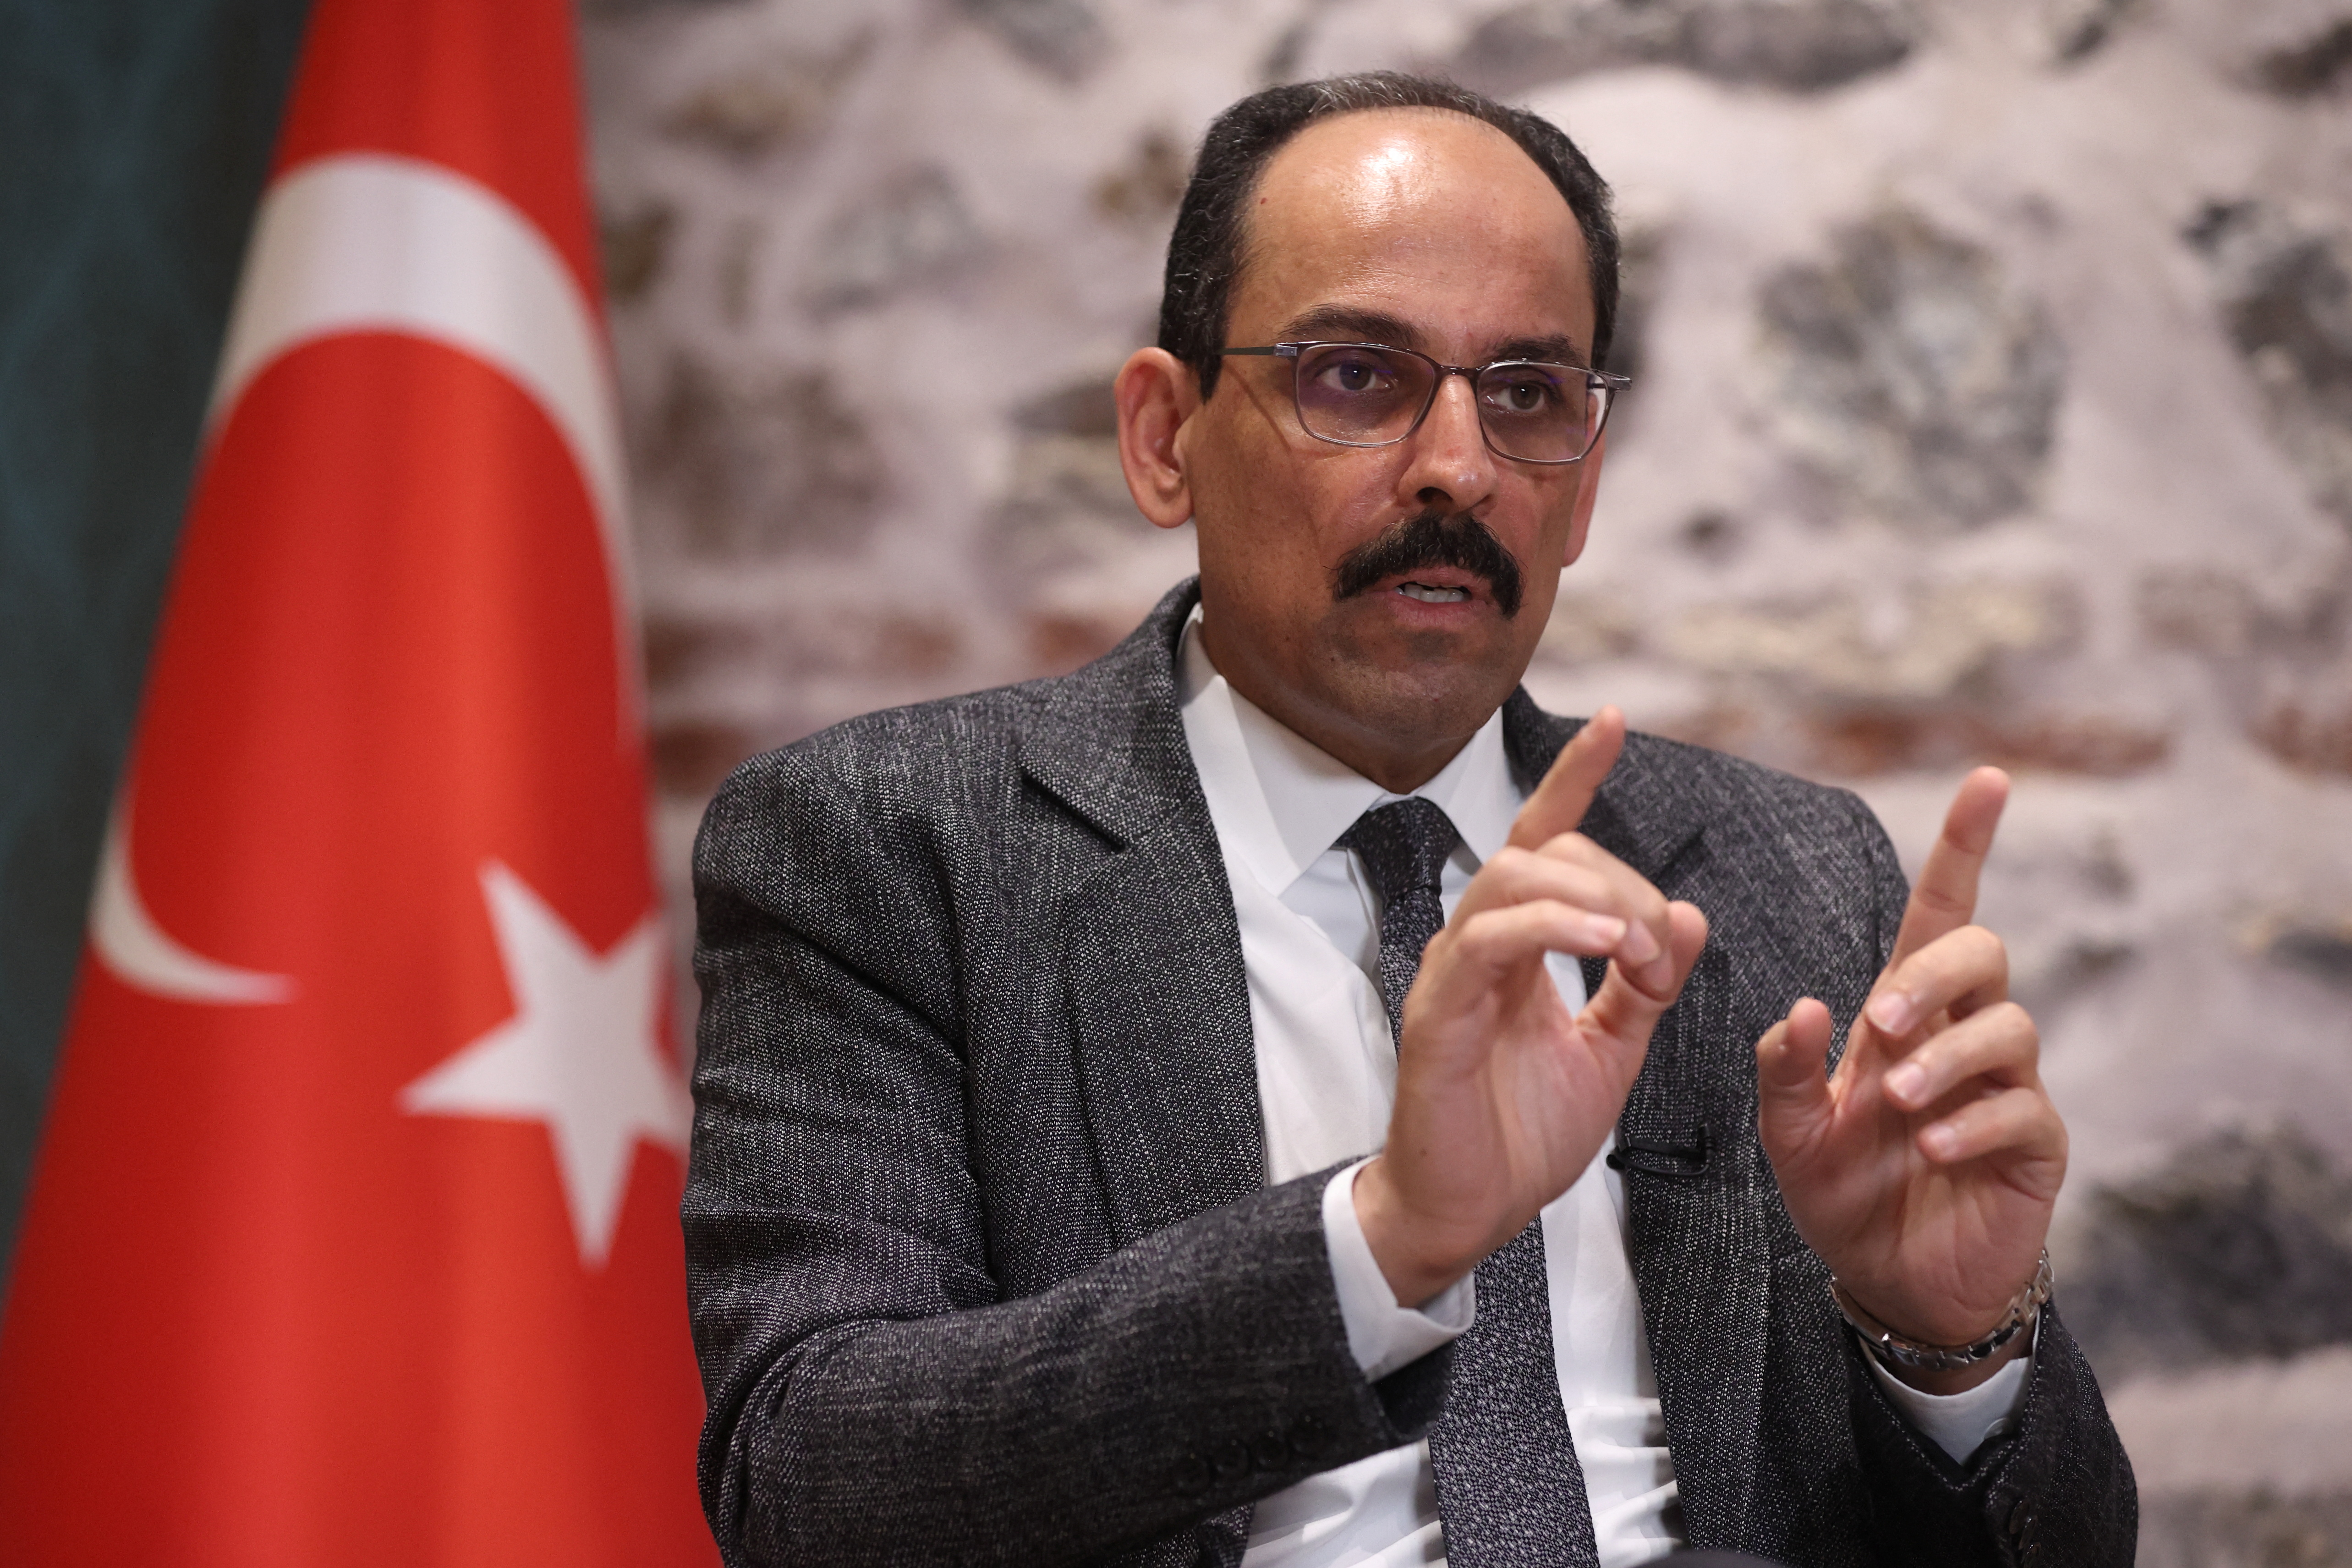 Interview with Turkish President Erdogan's spokesman and chief foreign policy adviser Kalin in Istanbul